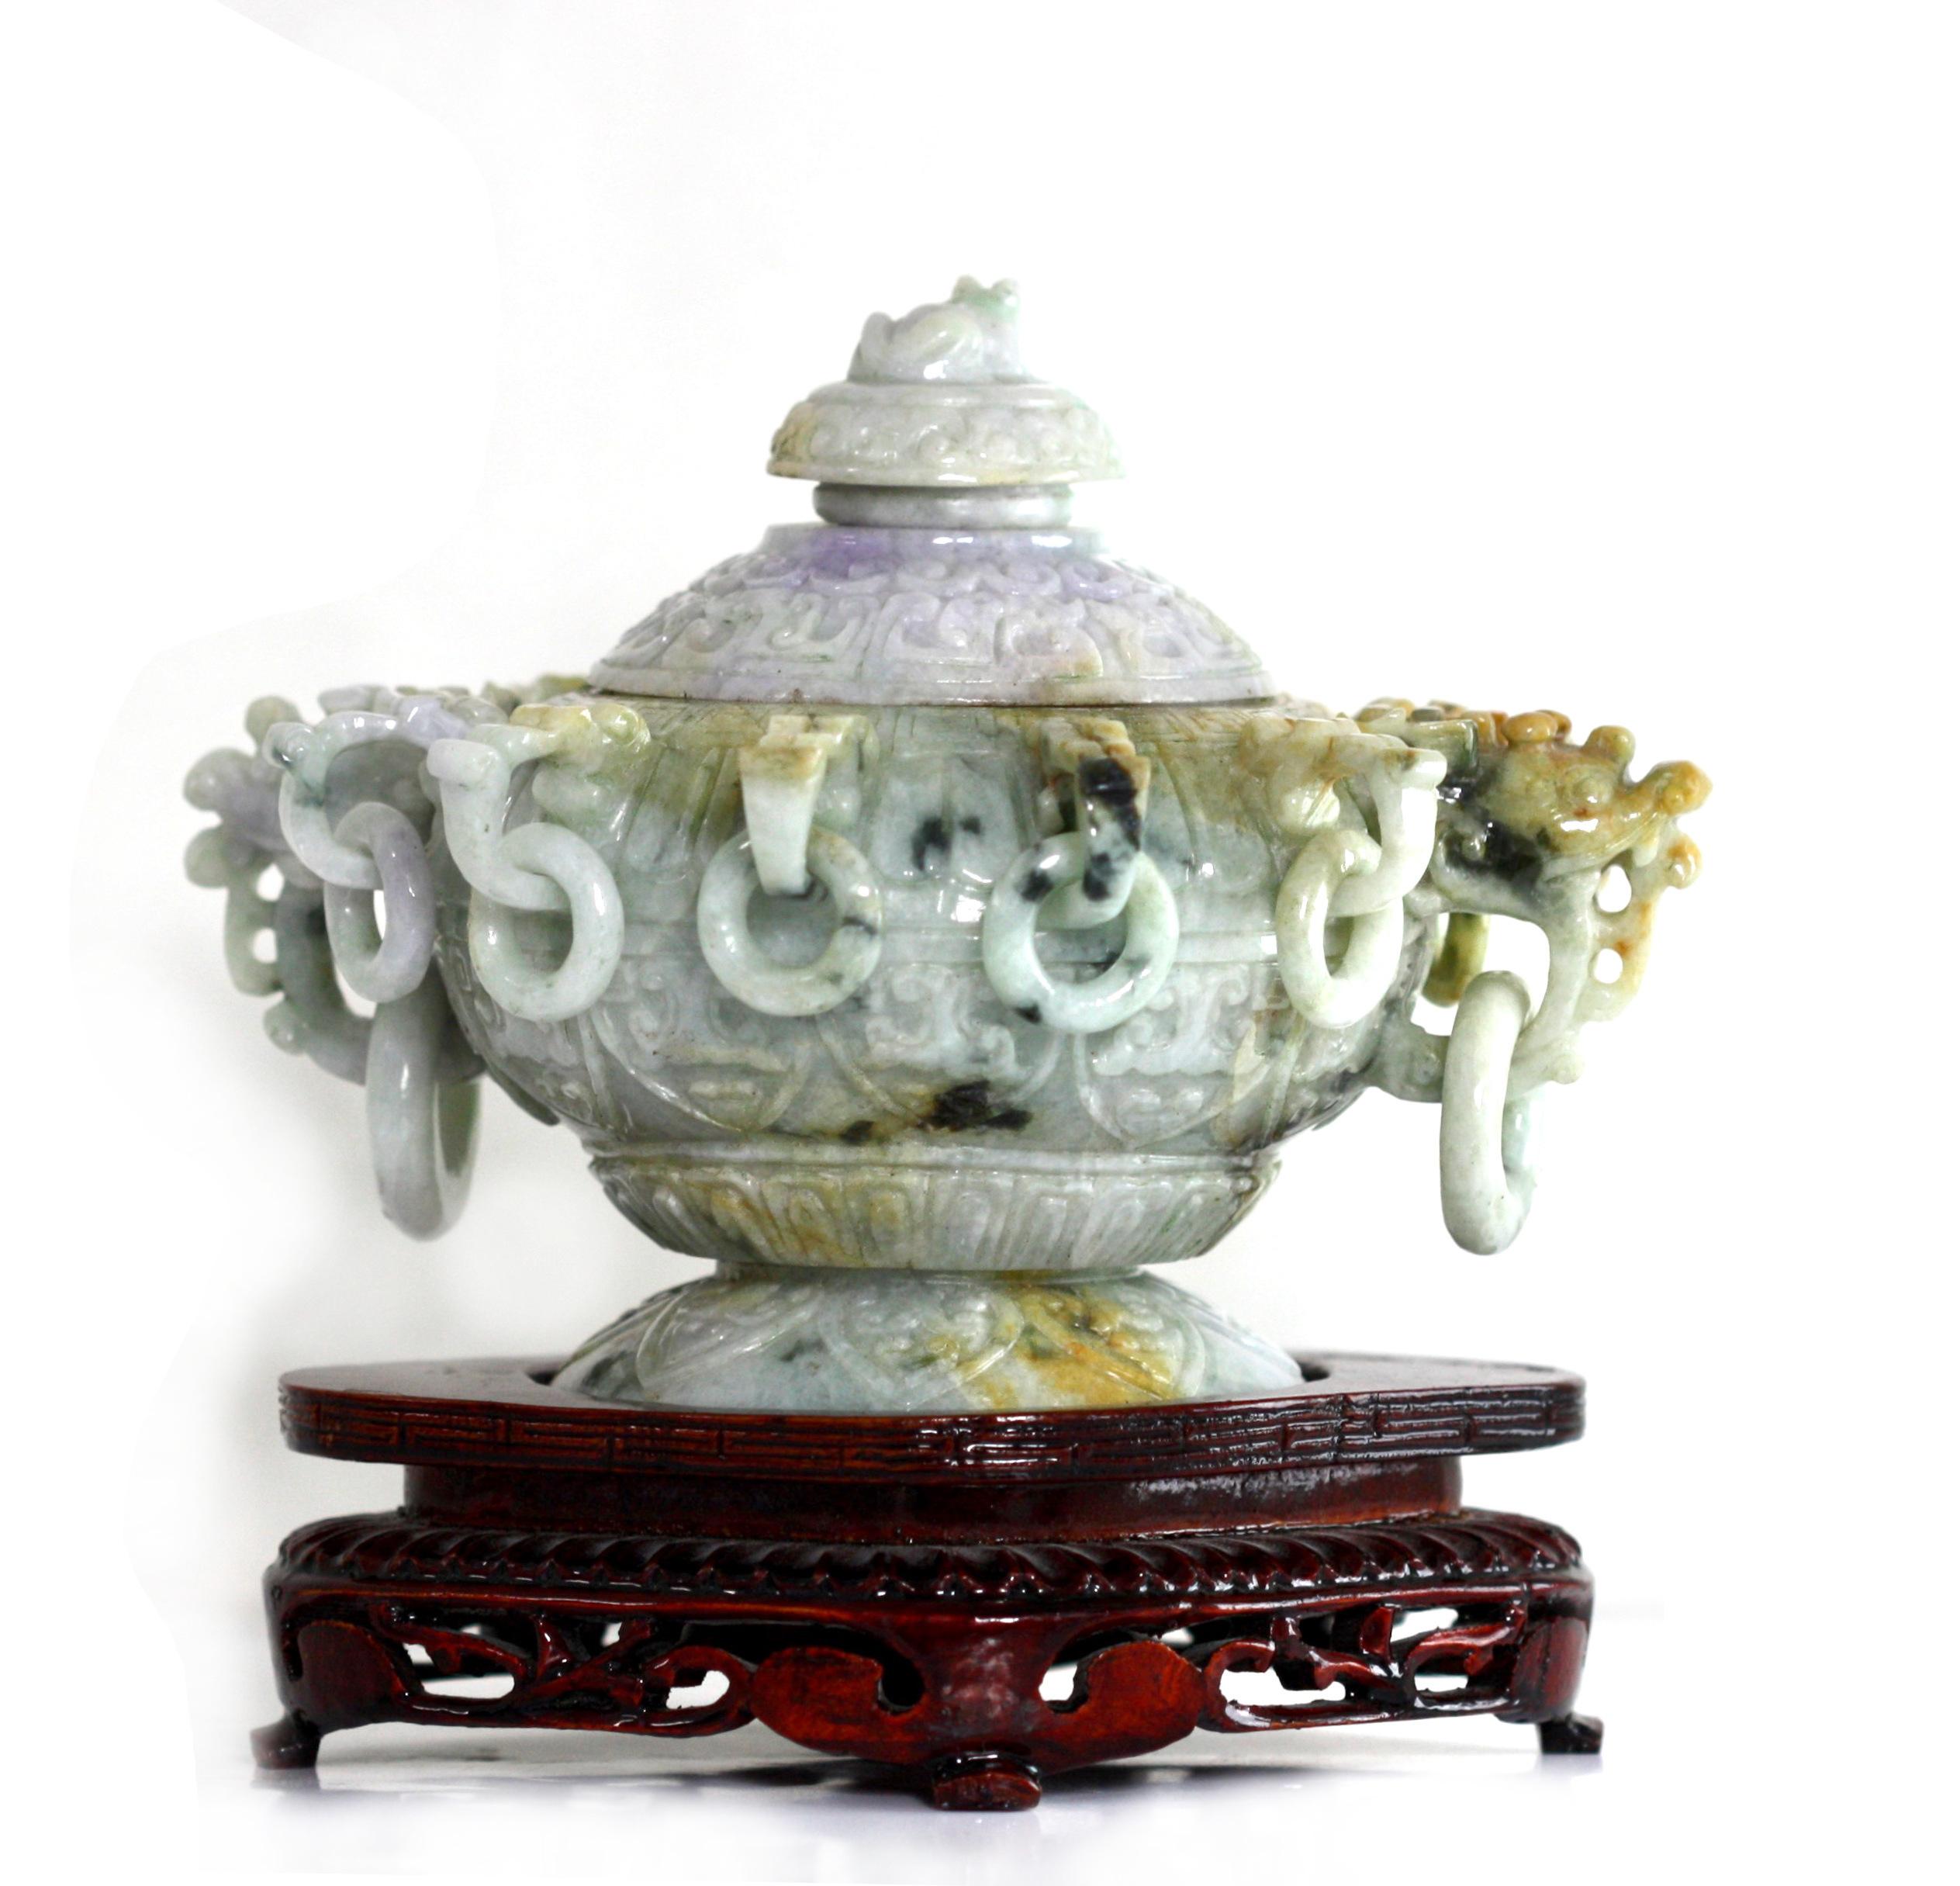  Chinese Unusual Multi-Colored Jade Covered Bowl/Censor In Good Condition For Sale In West Palm Beach, FL